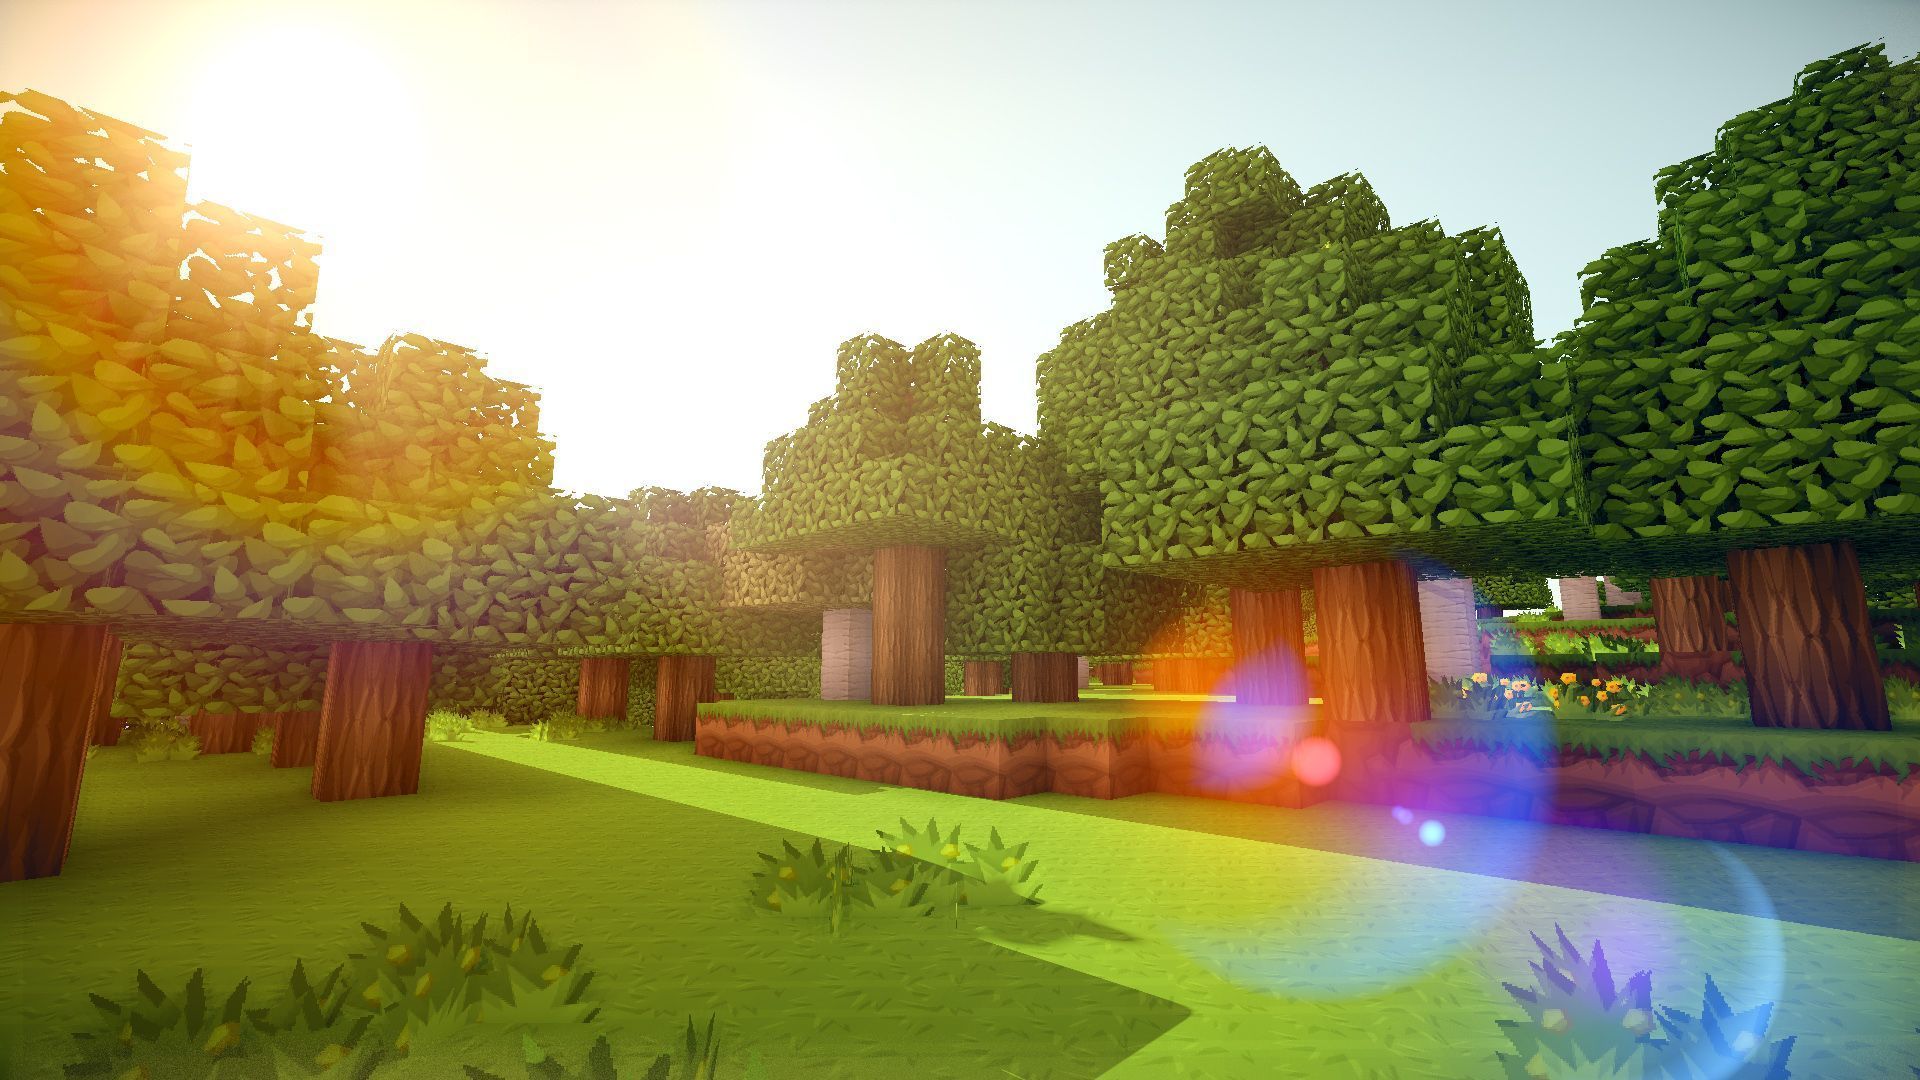 338 Minecraft HD Wallpapers | Backgrounds - Wallpaper Abyss - Page 2